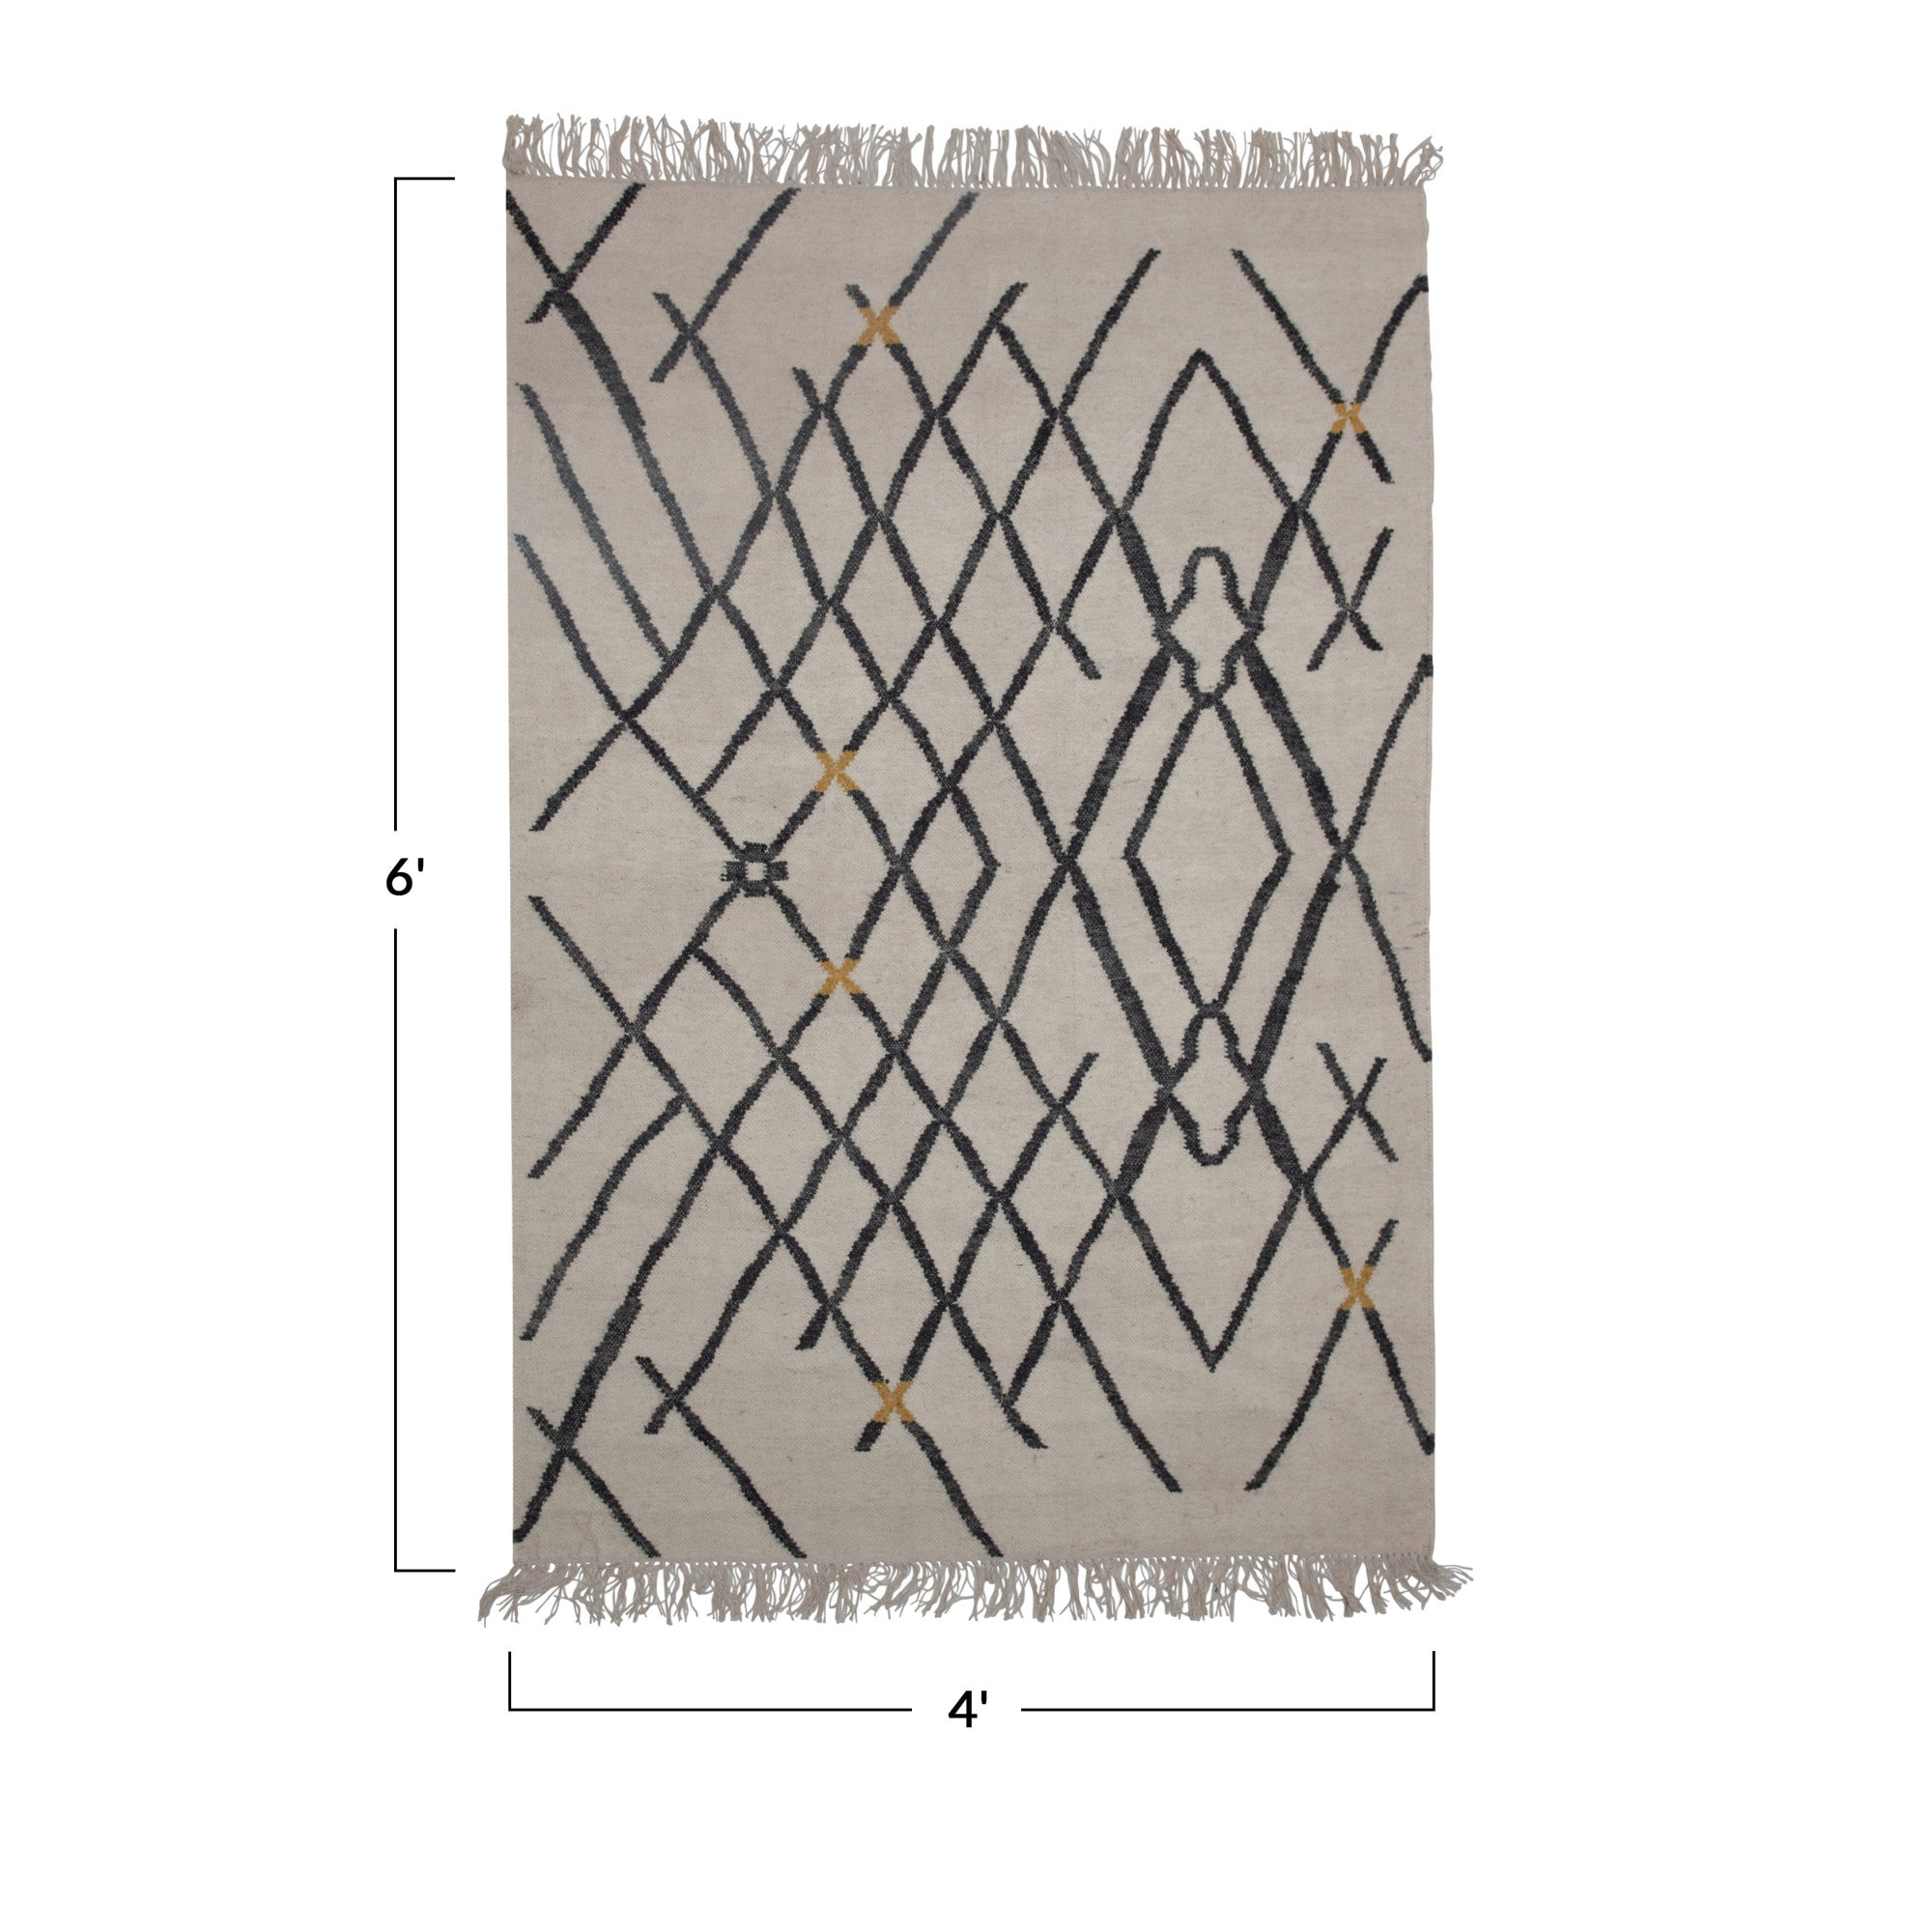 4 feet by 6 feet rug with abstract design in off-white, black and yellow.